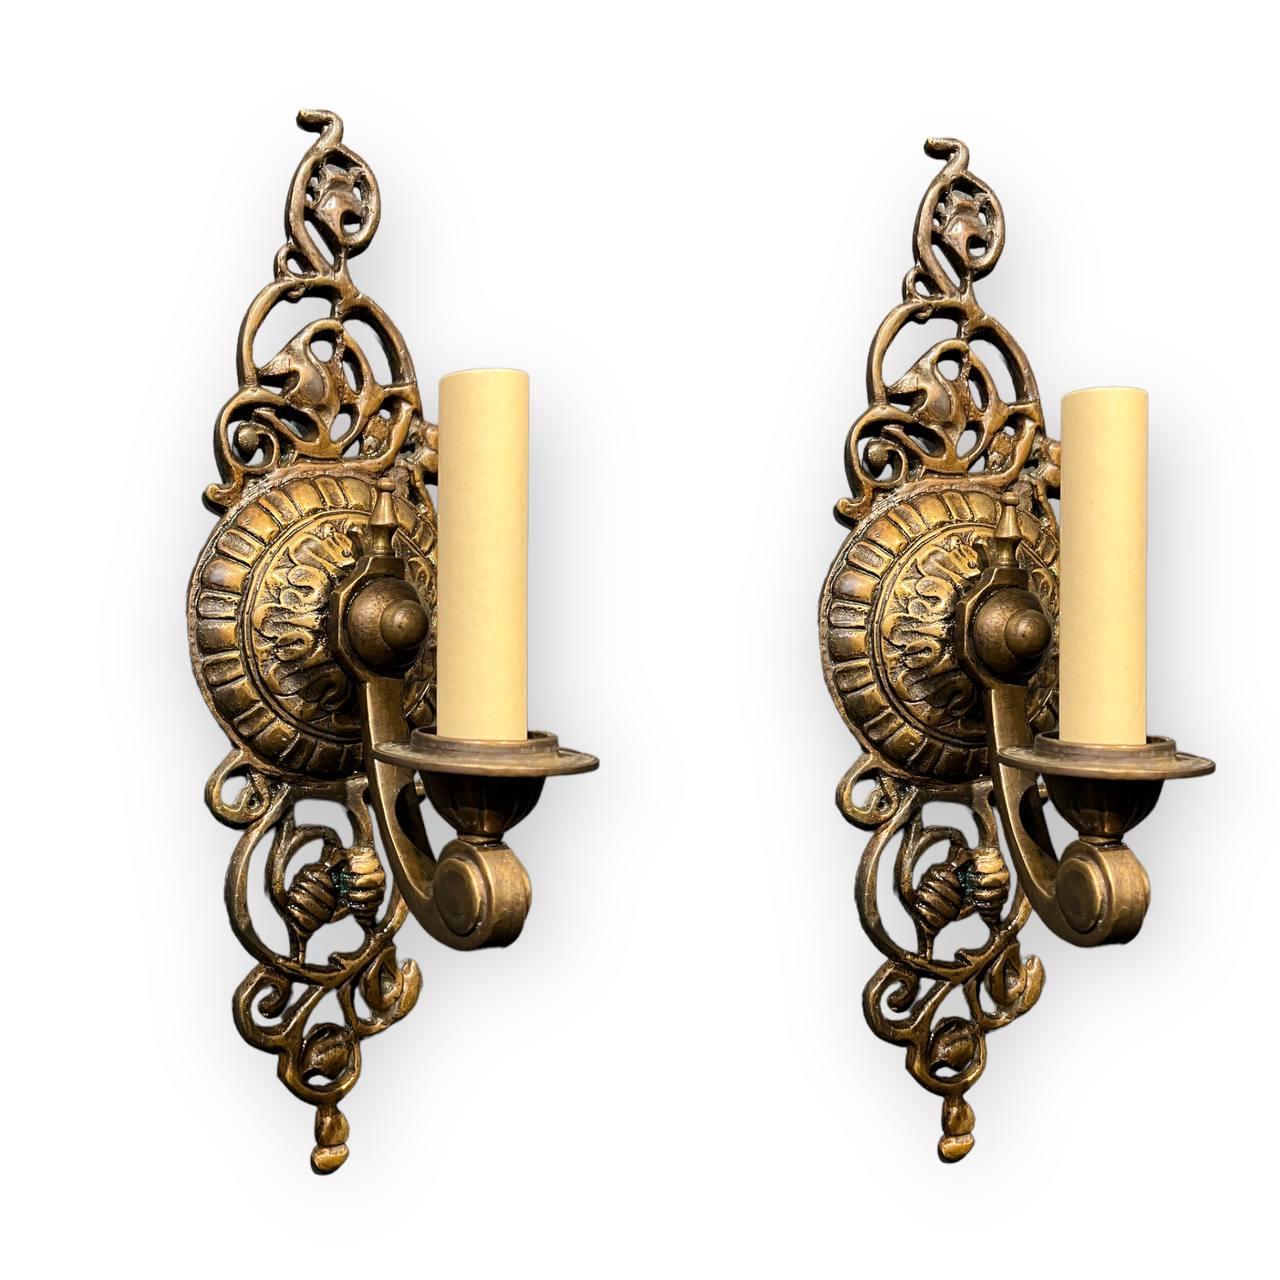 A pair of circa 1920's brown patinated bronze sconces with one light